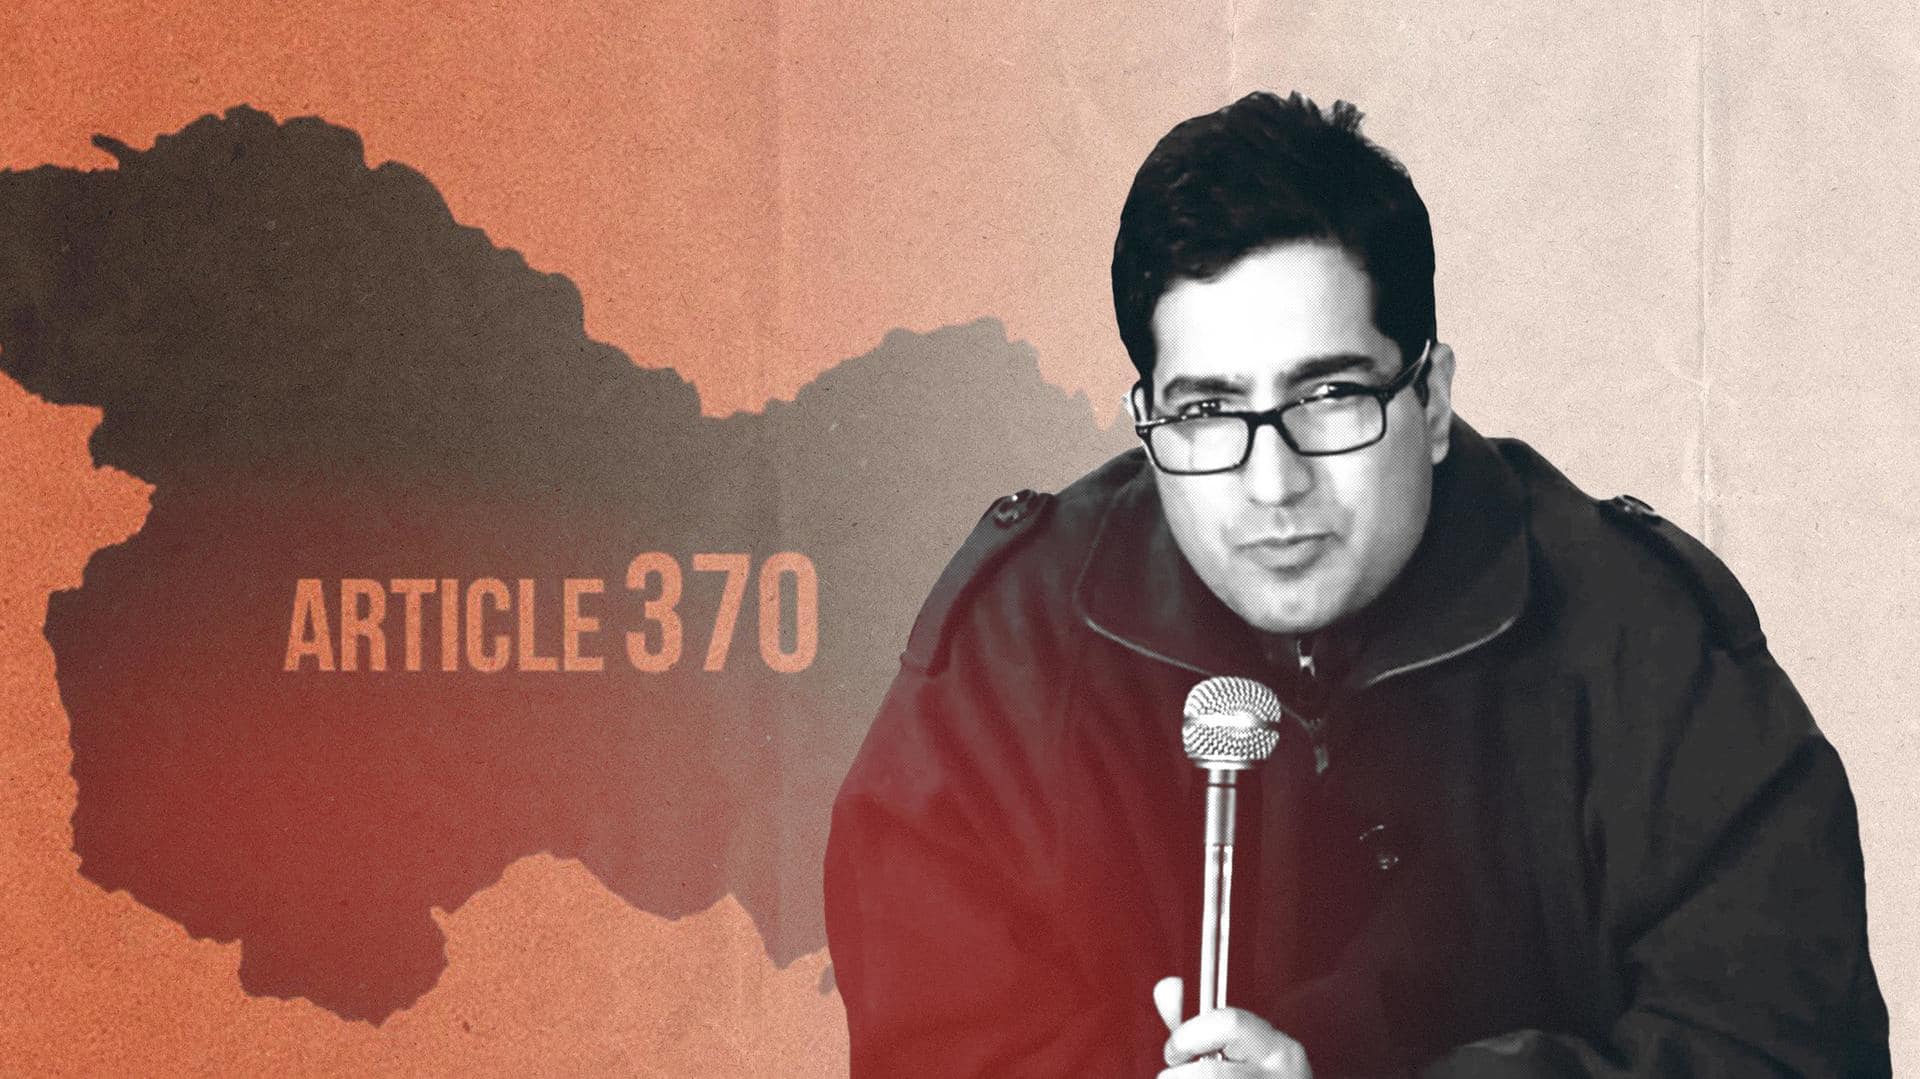 No going back on Article 370: IAS officer Shah Faesal